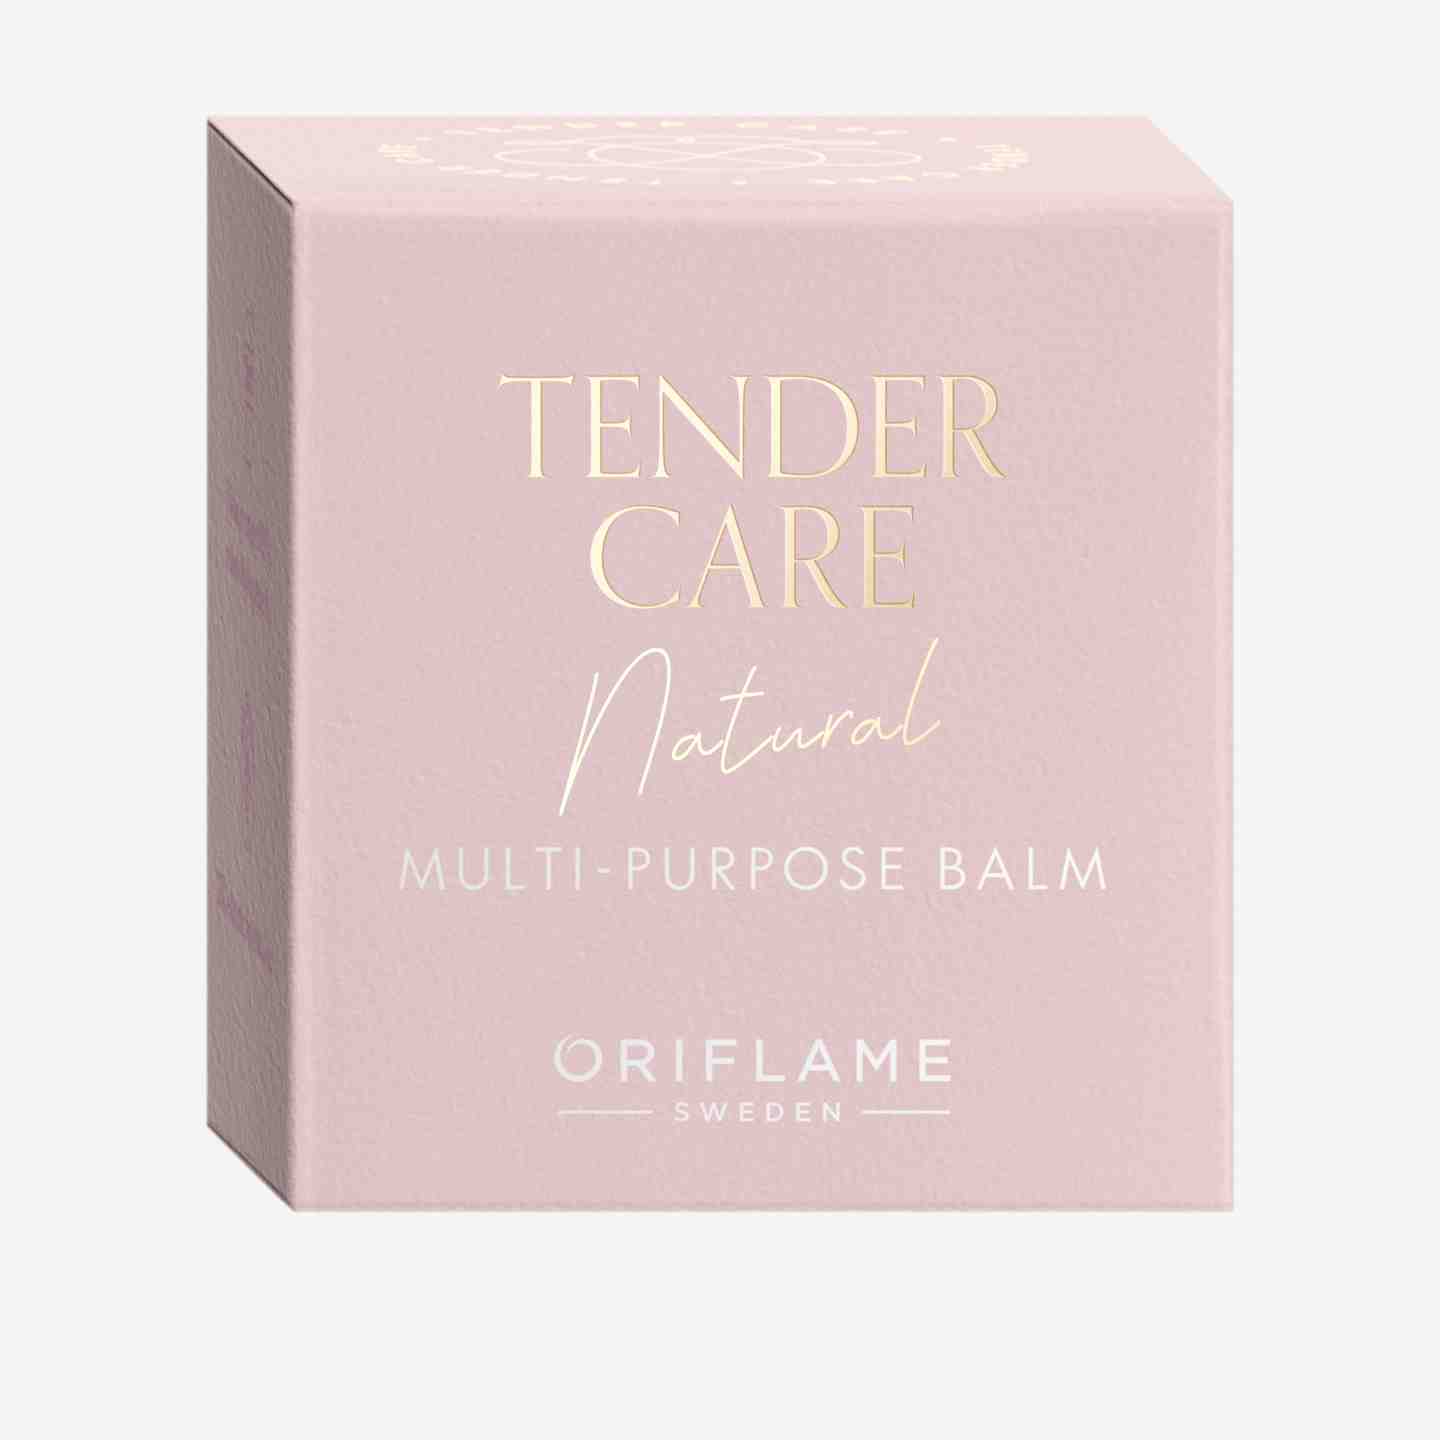 Oriflame Tender Care Rose Protecting Balm ingredients (Explained)